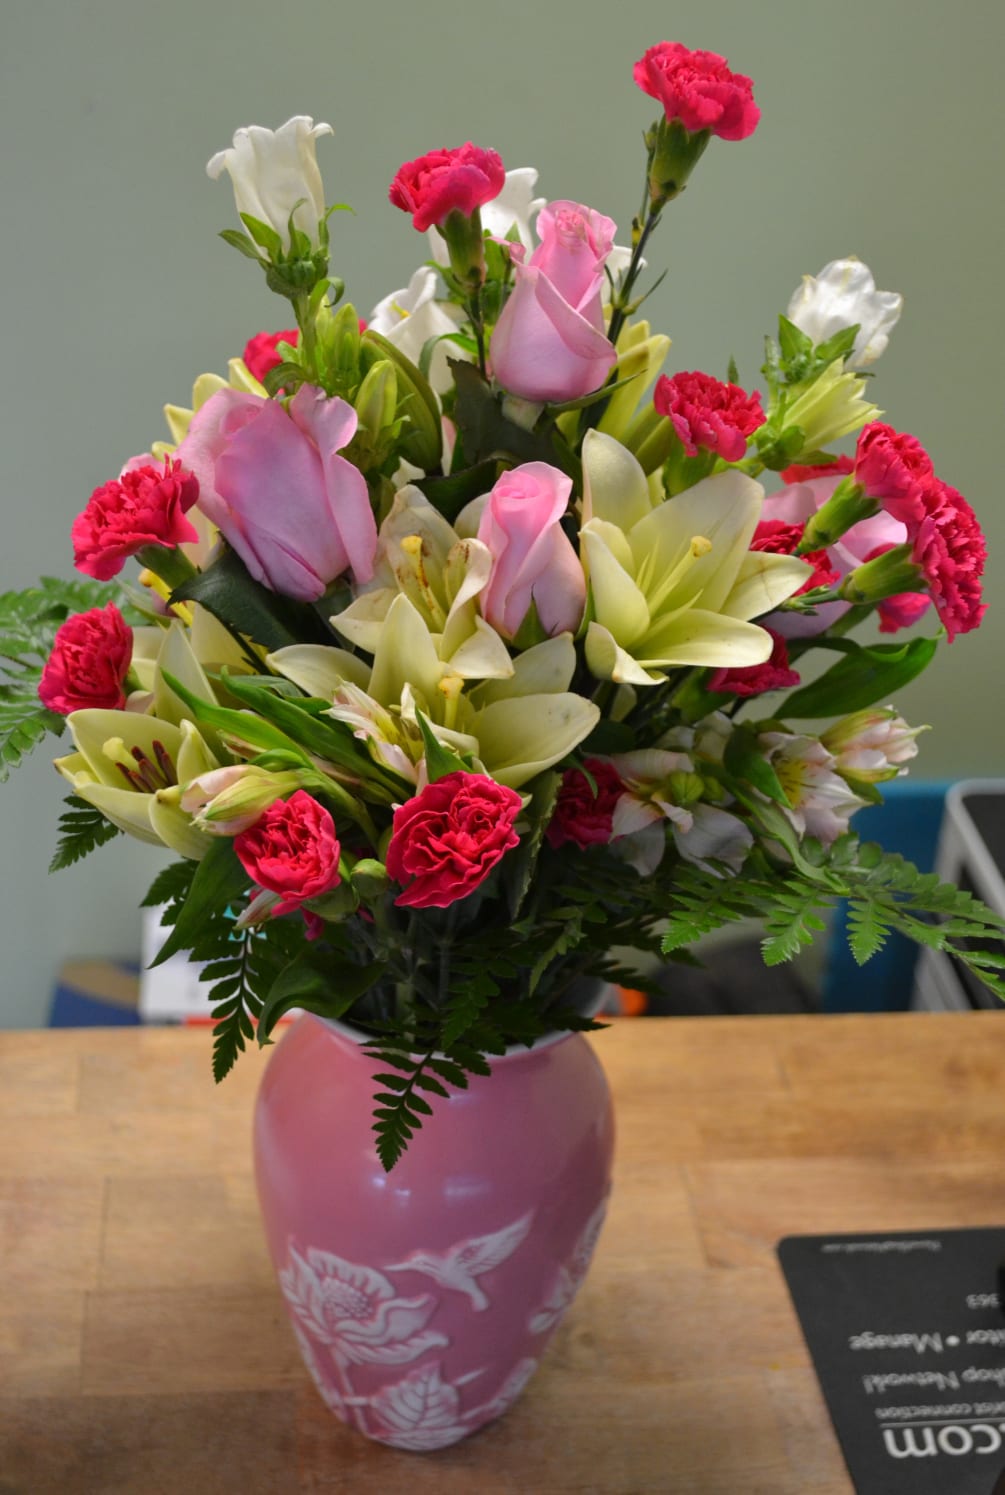 This stunning arrangement has pink roses, alstro, mini carnations, lilies, campanula and